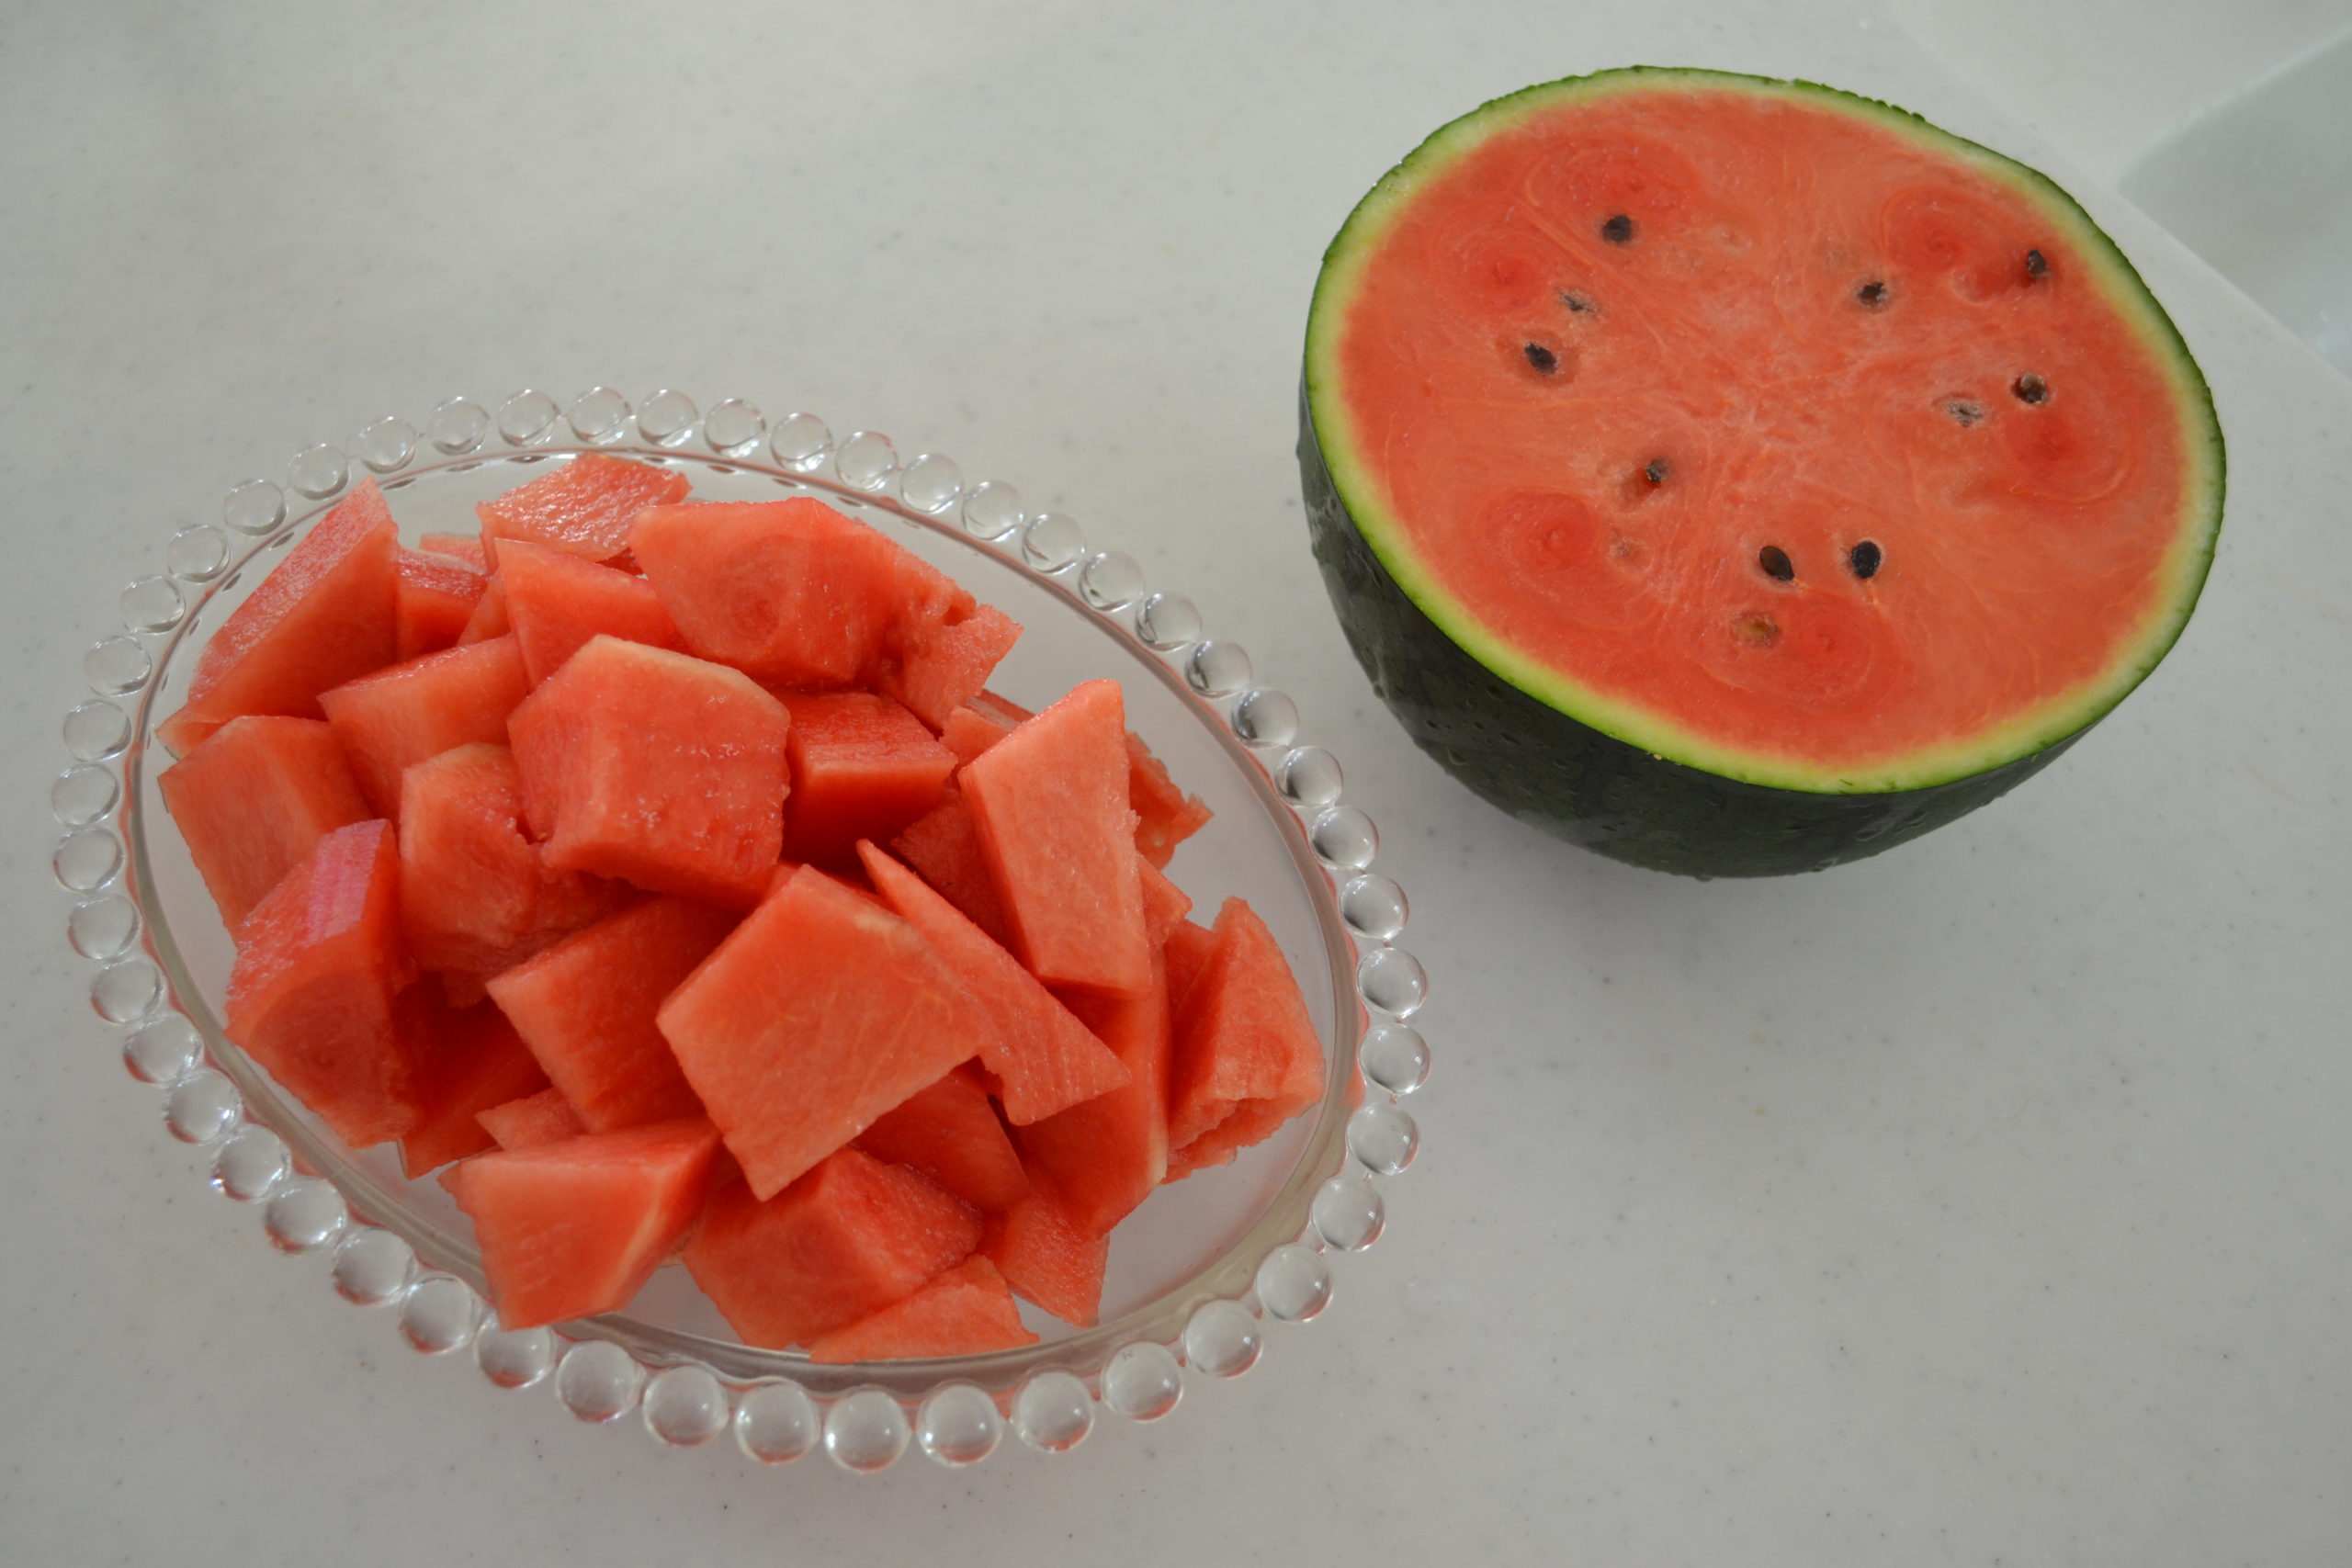 How to cut WATERMELON without seeds | The best way to eat Watermelon